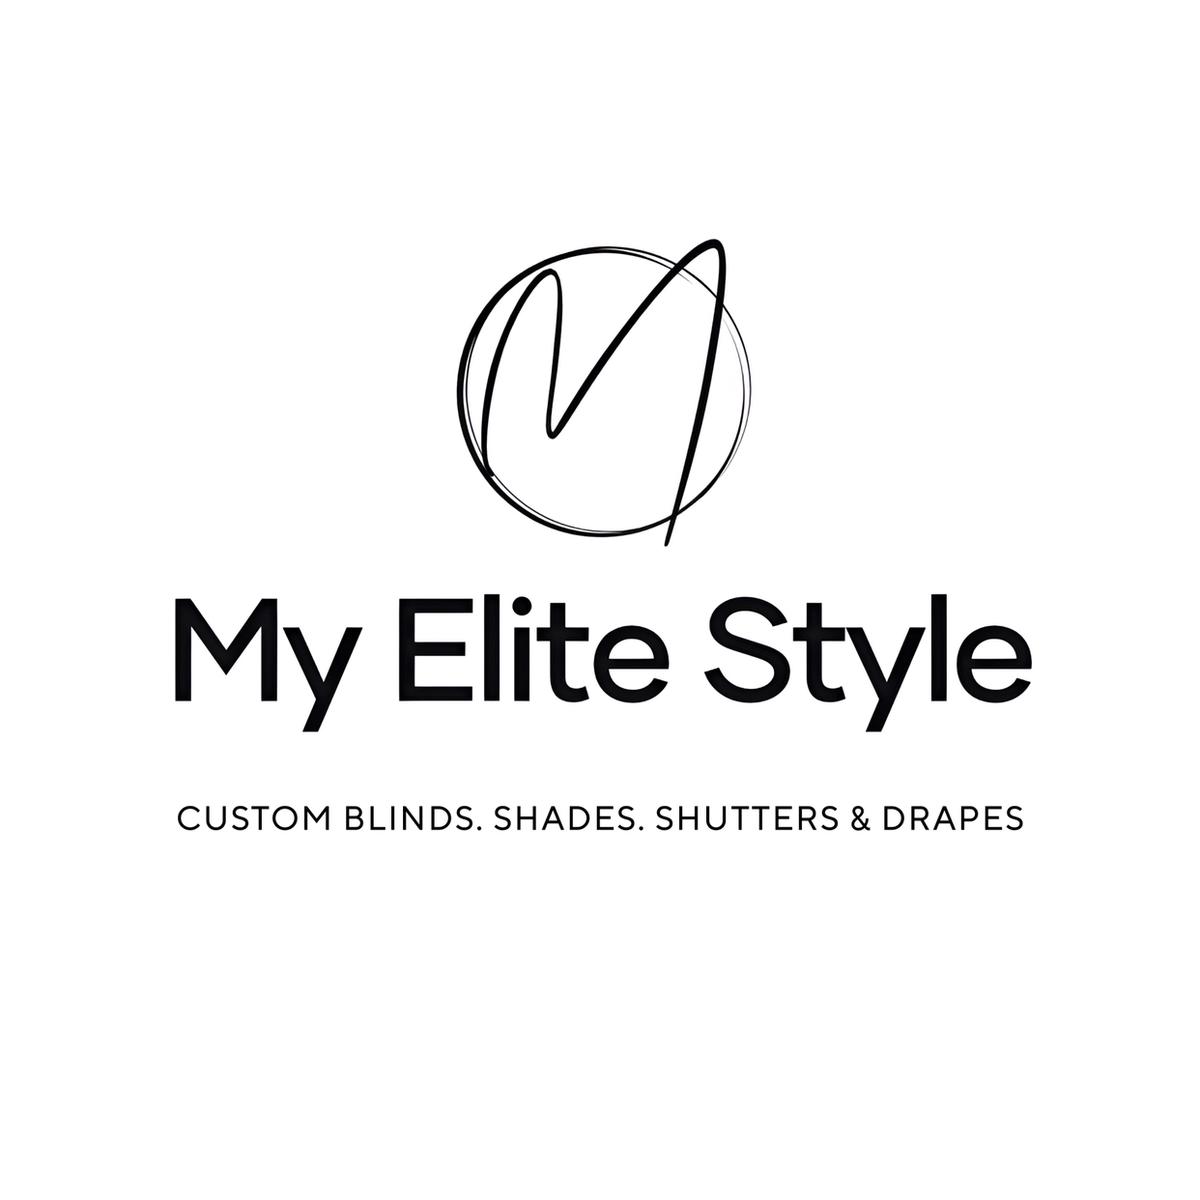 My Elite Style's images